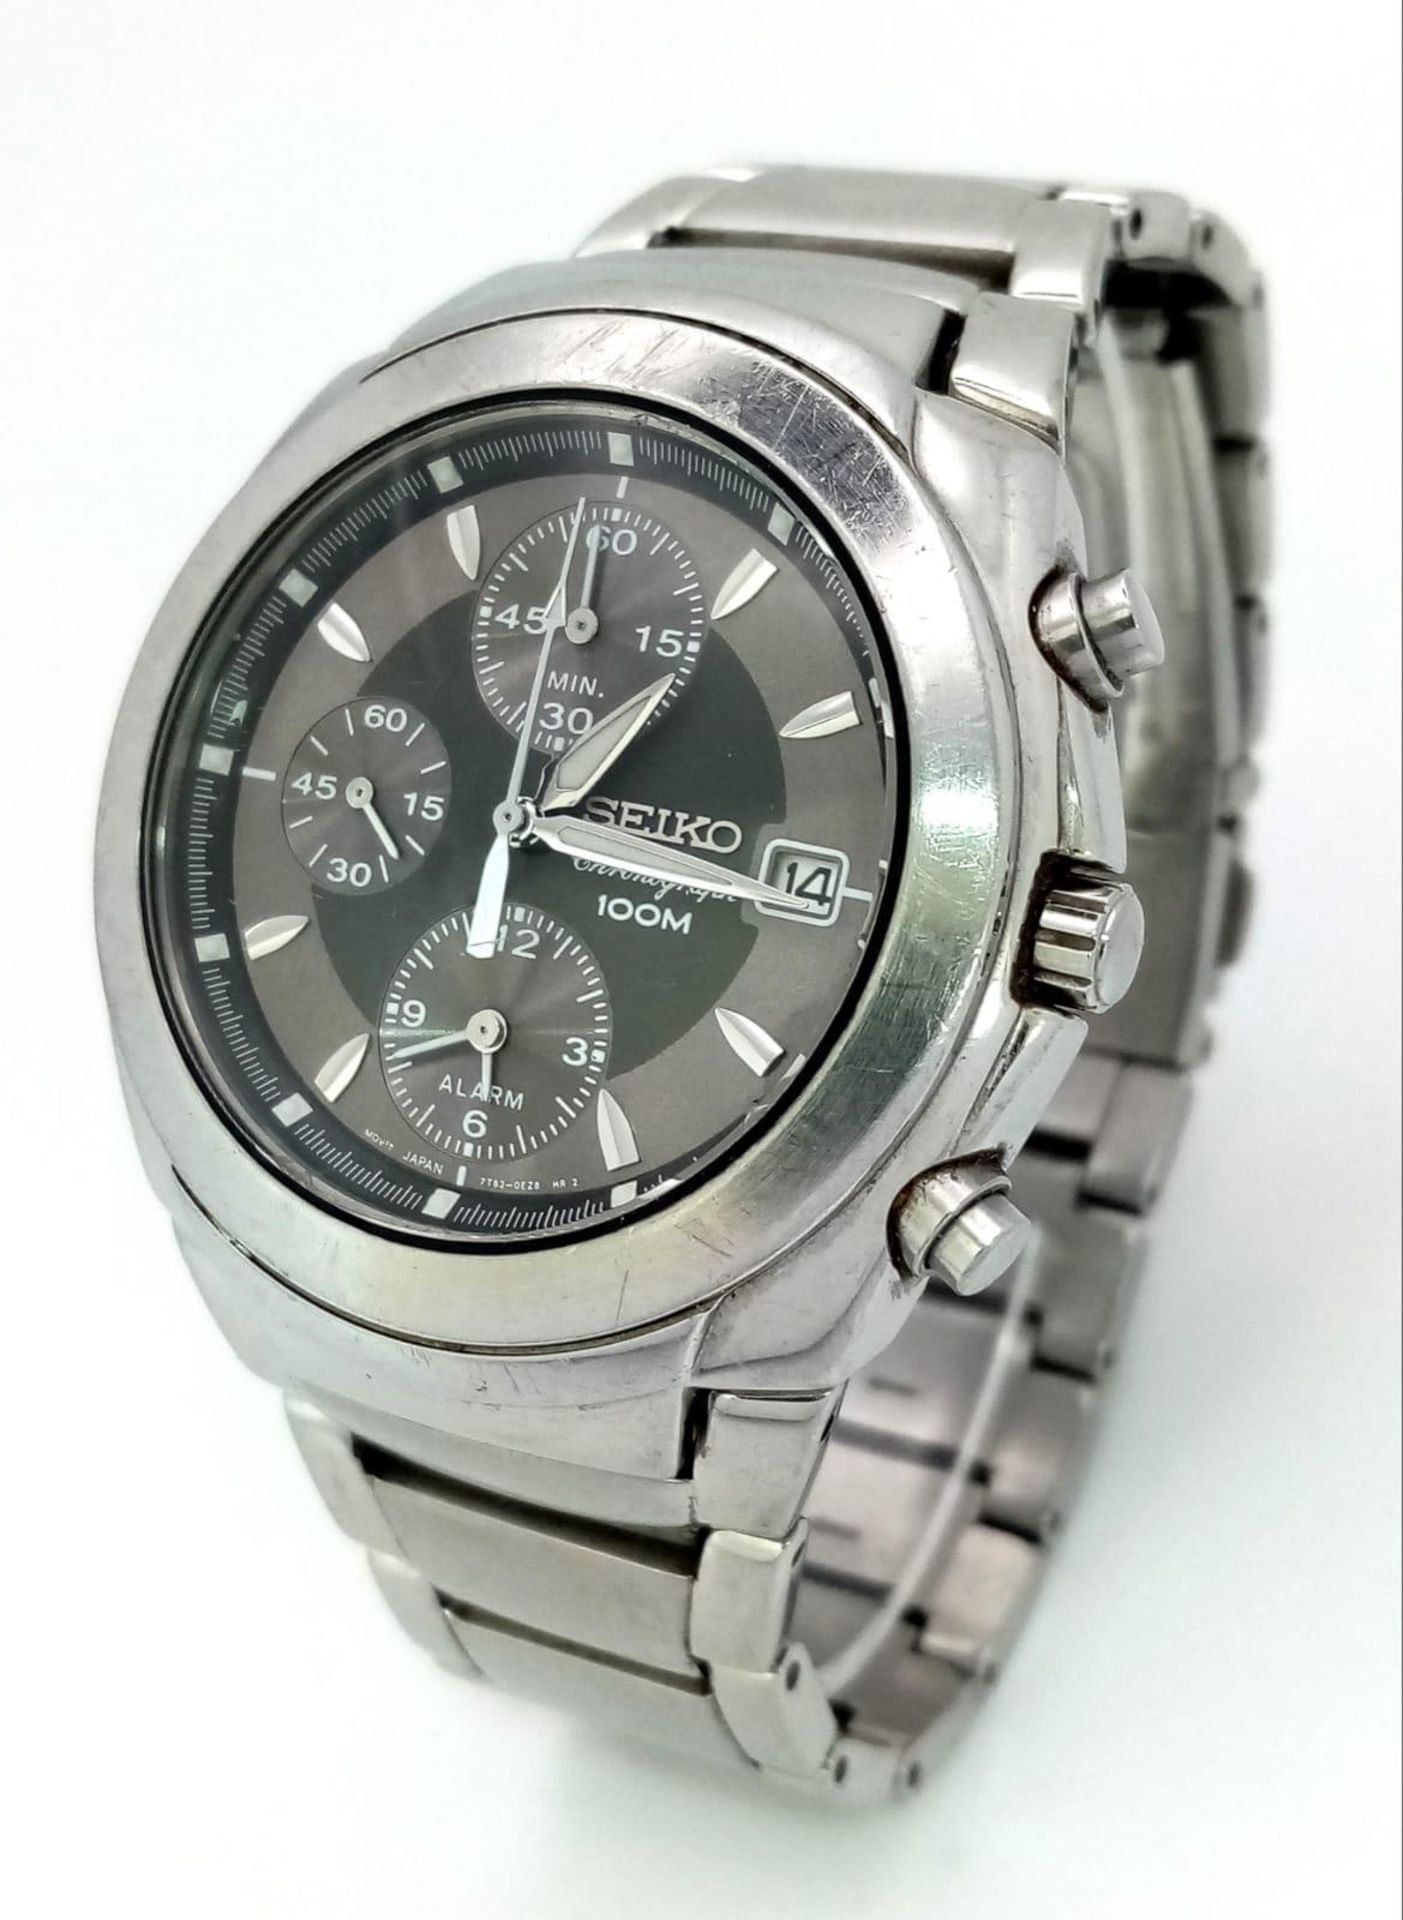 A Seiko Chronograph Quartz Gens Watch. Stainless steel strap and case - 40mm. Silver tone dial